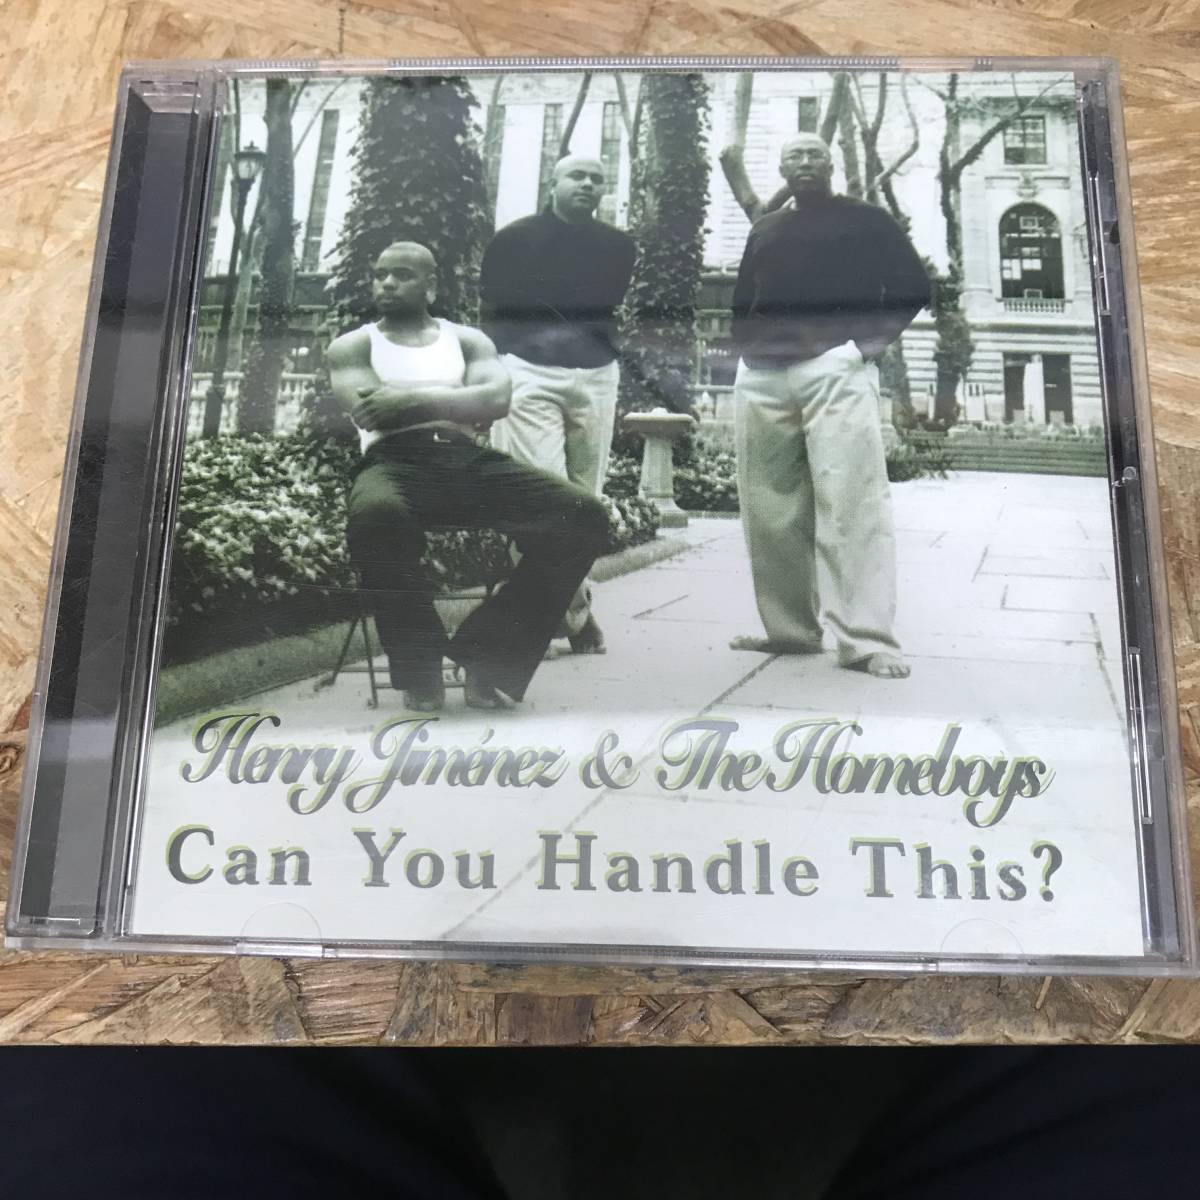 ● HIPHOP,R&B HENRY JIMENEZ & THE HOMEBOYS - CAN YOU HANDLE THIS? アルバム,INDIE CD 中古品_画像1